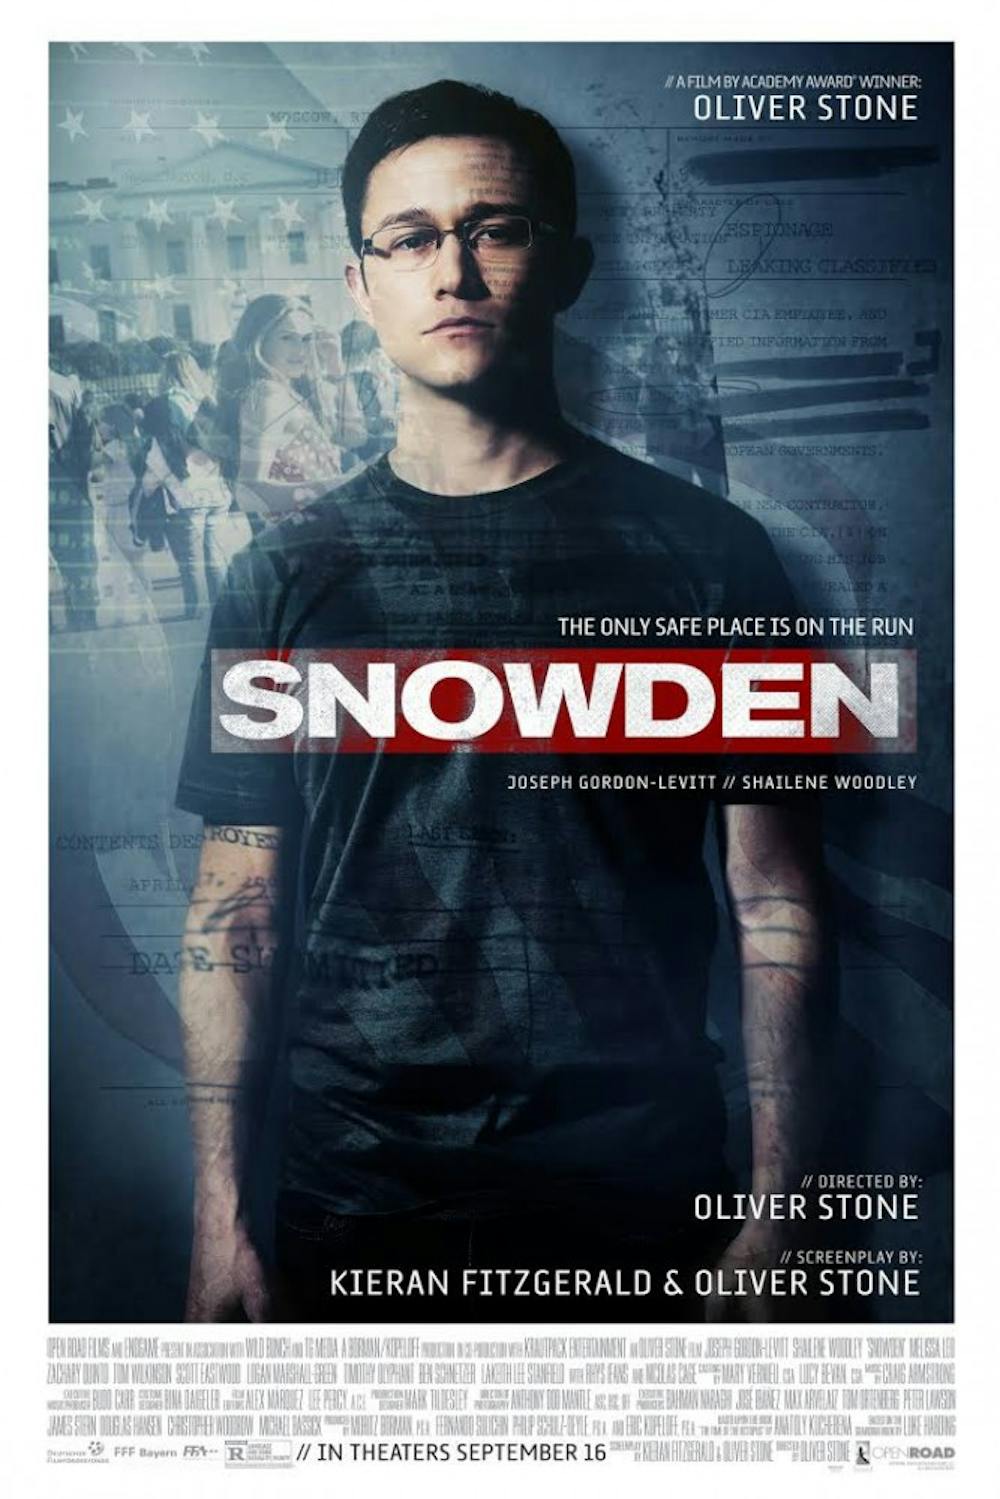 Snowden LIVE: An Interview with the director, stars and the man behind "Snowden"